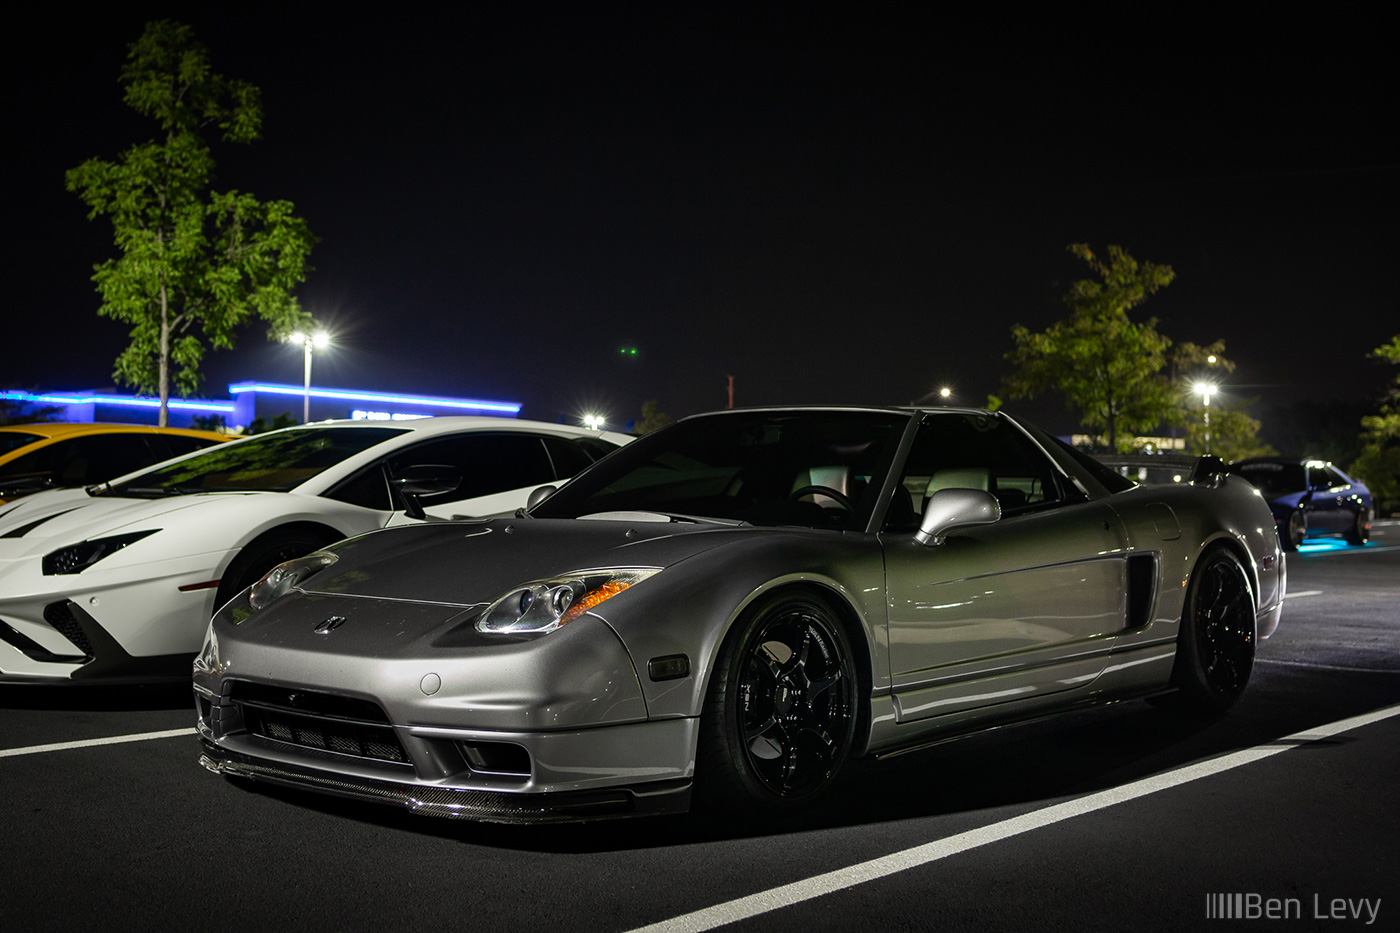 Silver Acura NSX at Car Meet in Warrenville